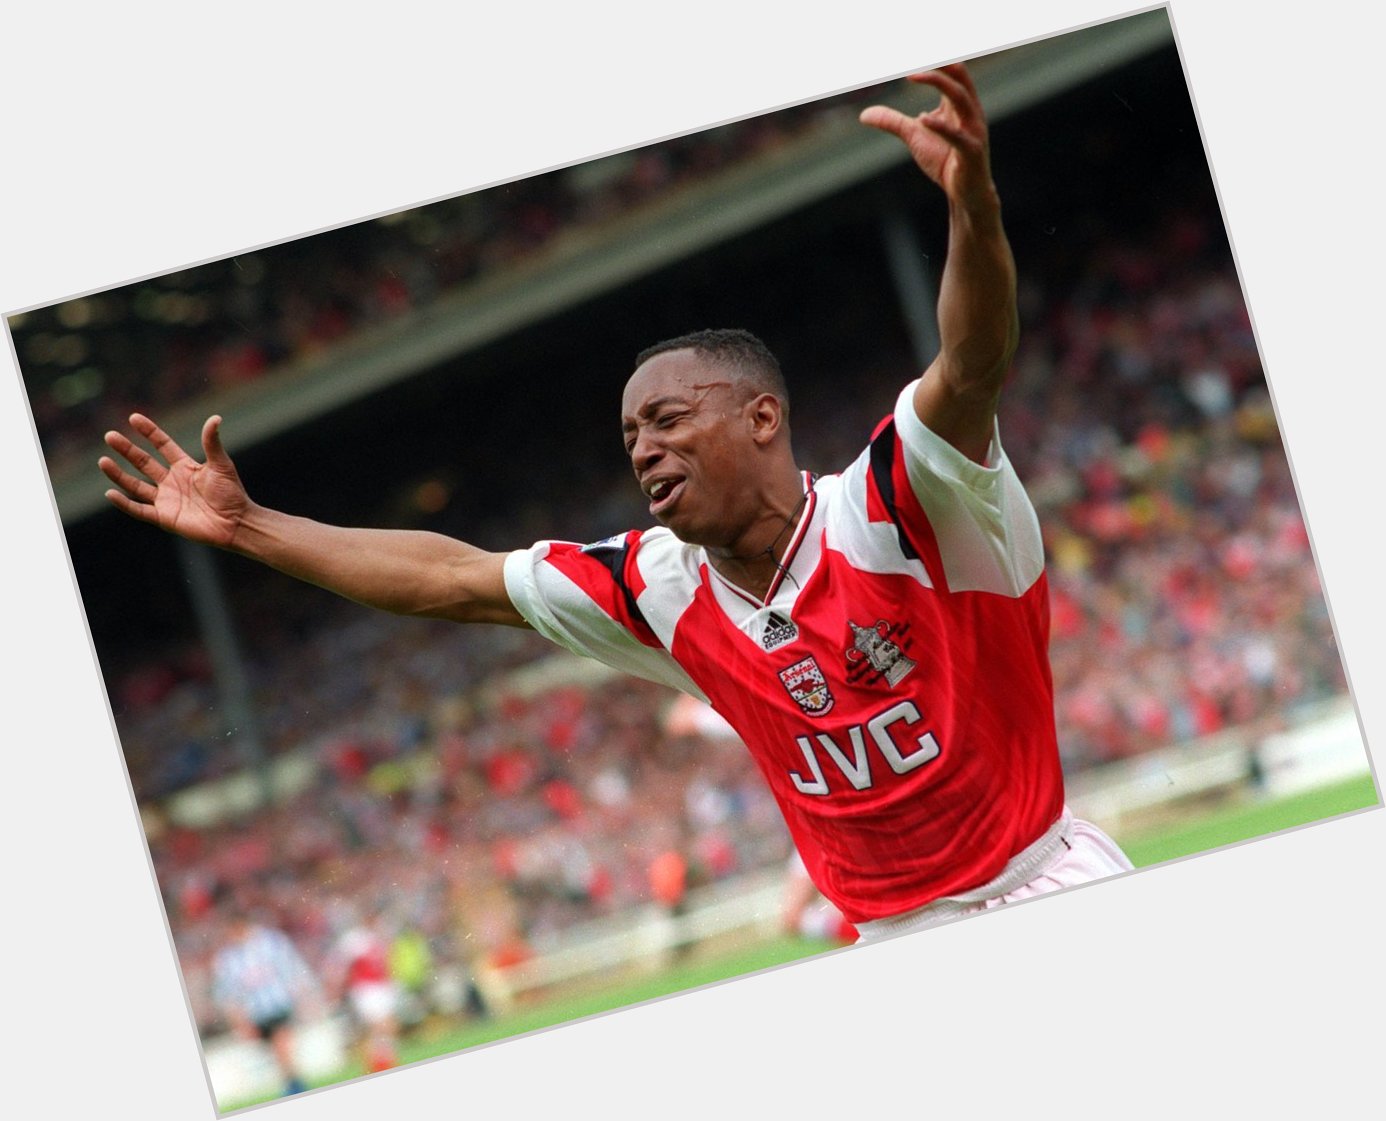 Happy birthday, Arsenal legend Ian Wright!   Your favourite current star is _____ 